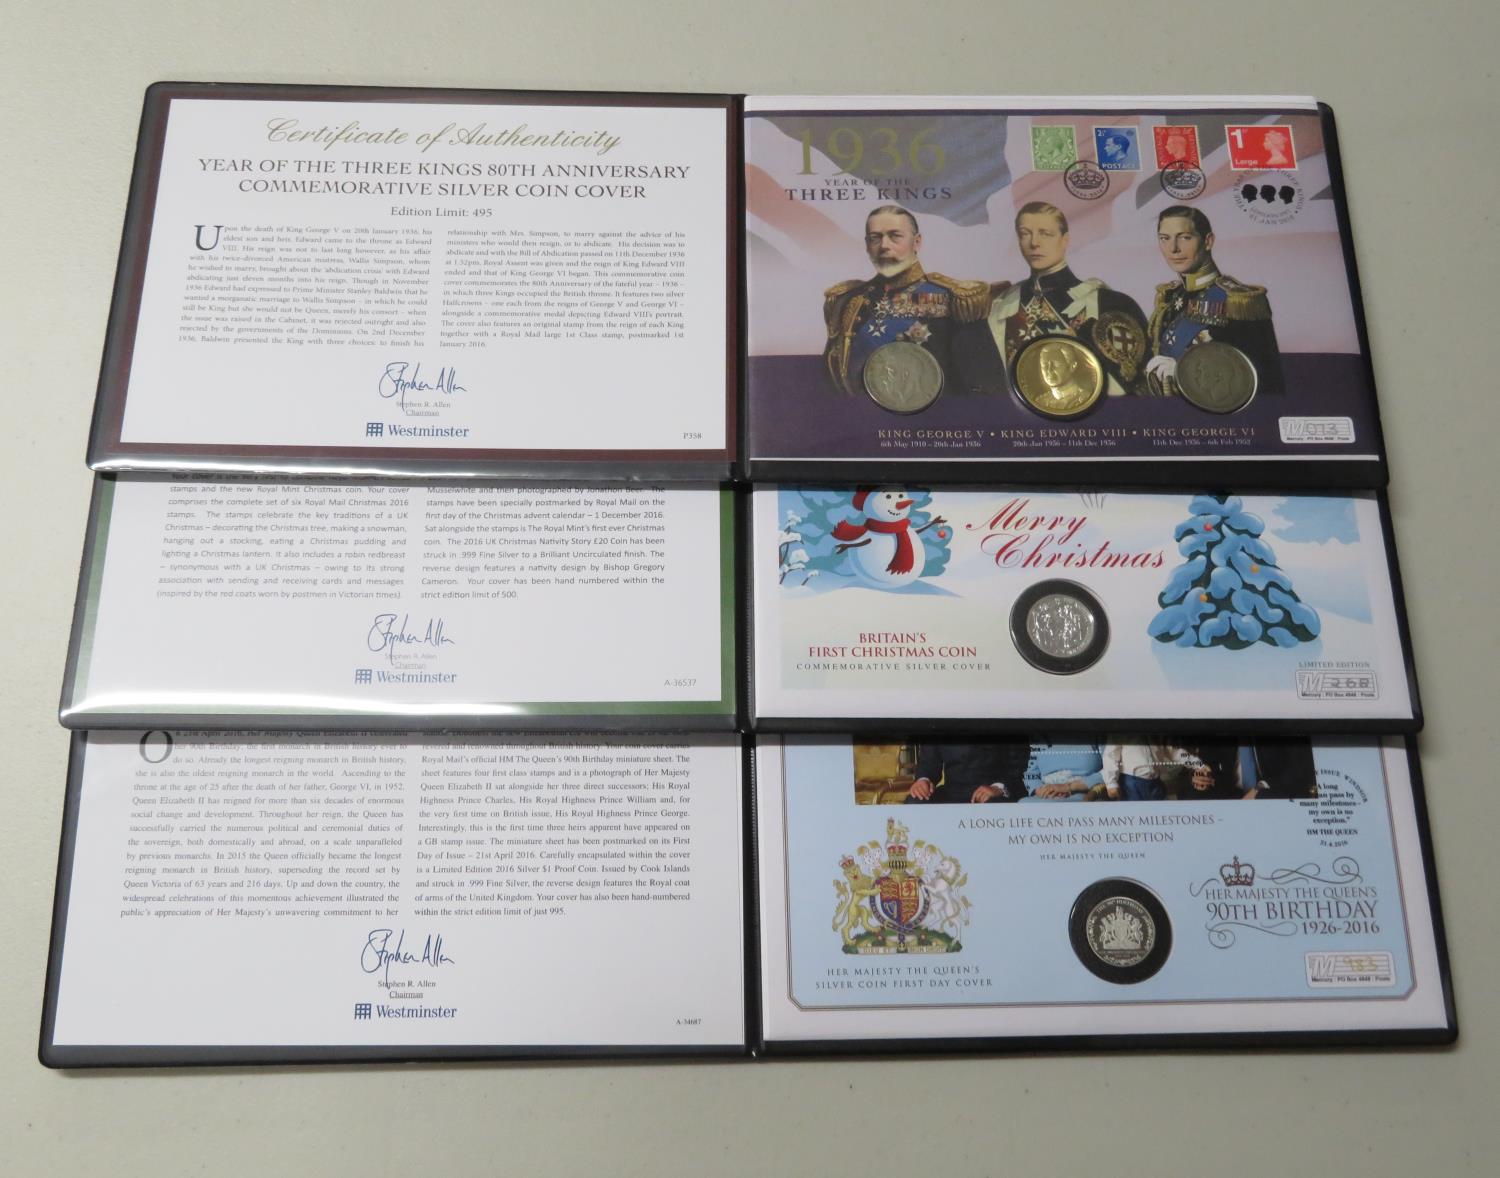 Mint condition Britain's First Christmas Coin, Year of the Three Kings Coins and Her Majesty's